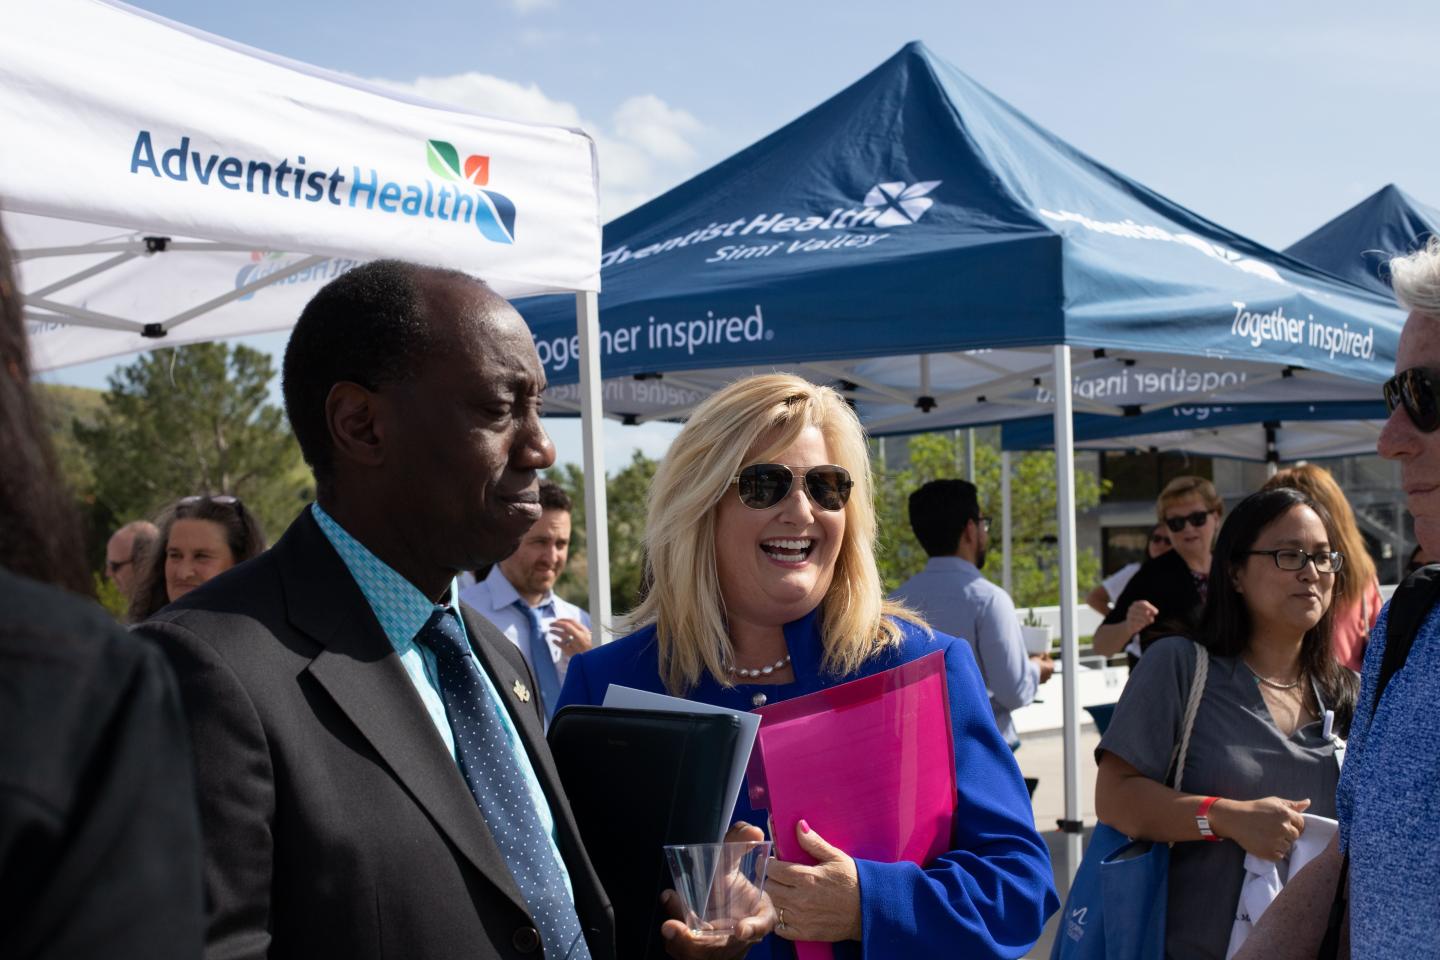 Dr. Julius Sokenu, Moorpark College President, and Jennifer Swenson, President of Adventist Health Simi Valley prepare to speak at an April 11 event to announce a multi-year partnership between Adventist Health Simi Valley, Moorpark College, Moorpark College Foundation and Ventura County Community College District.